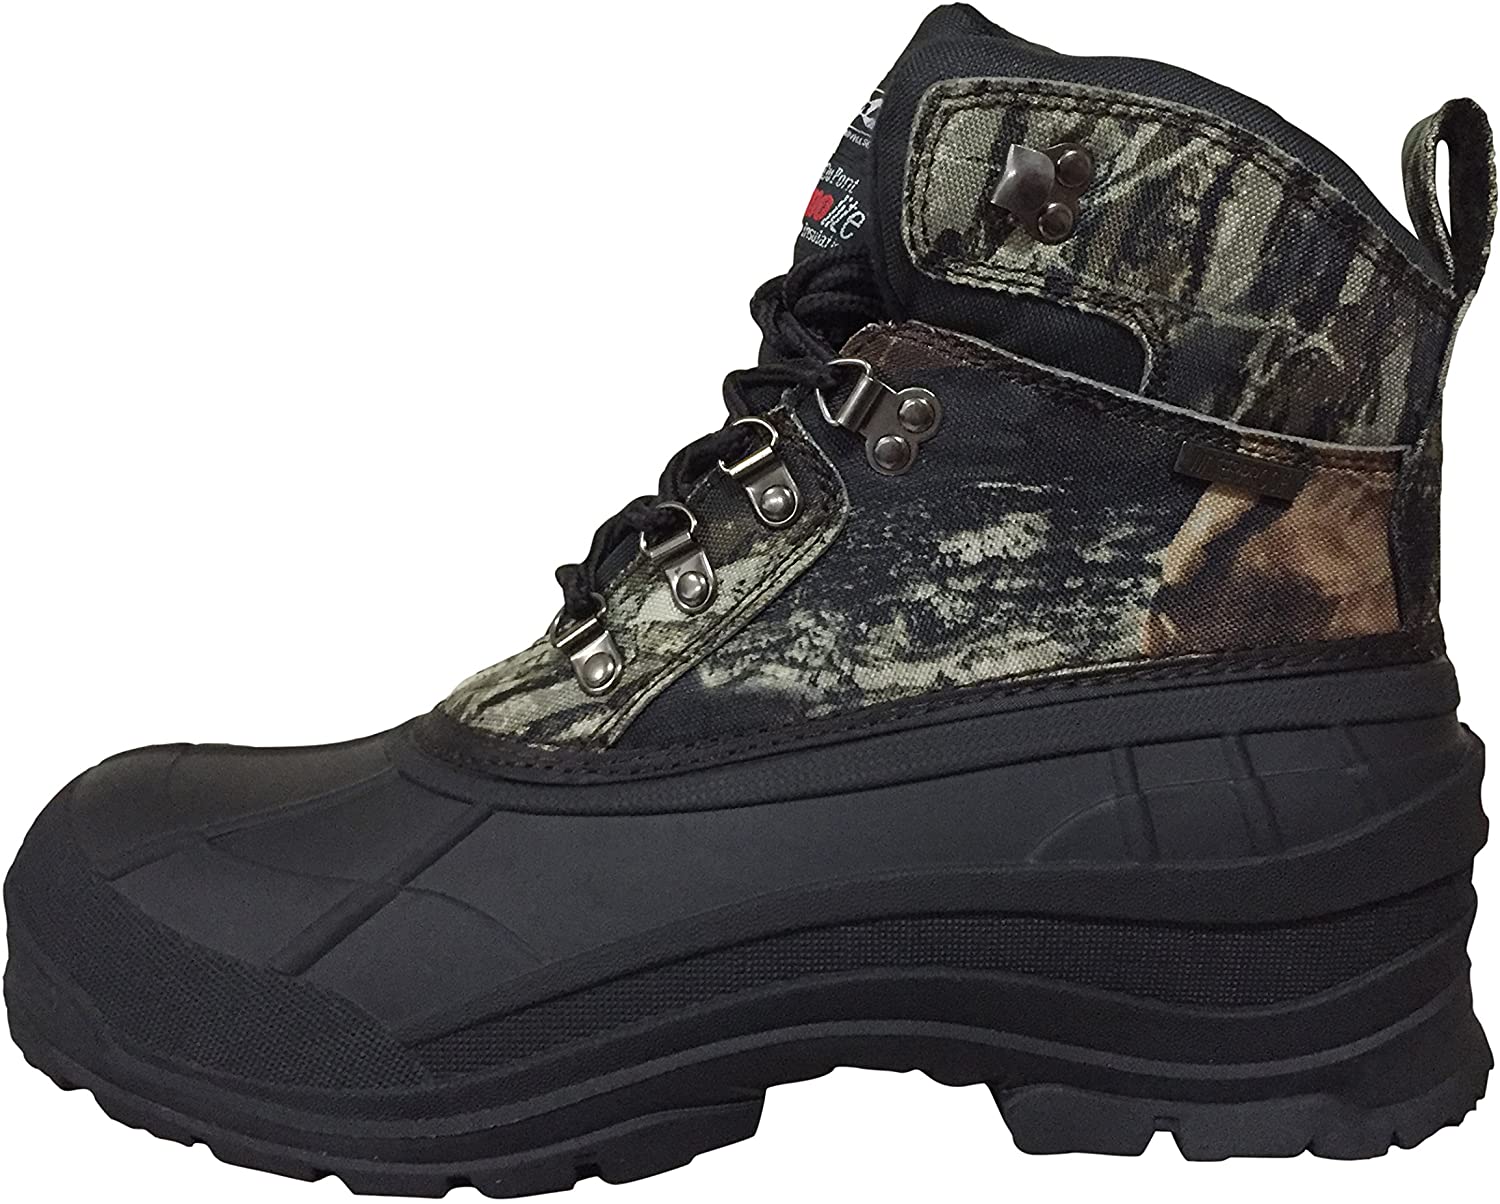 Men's Winter Snow Boots Camouflage Thermolite Insulated Hunting Shoes - image 2 of 5